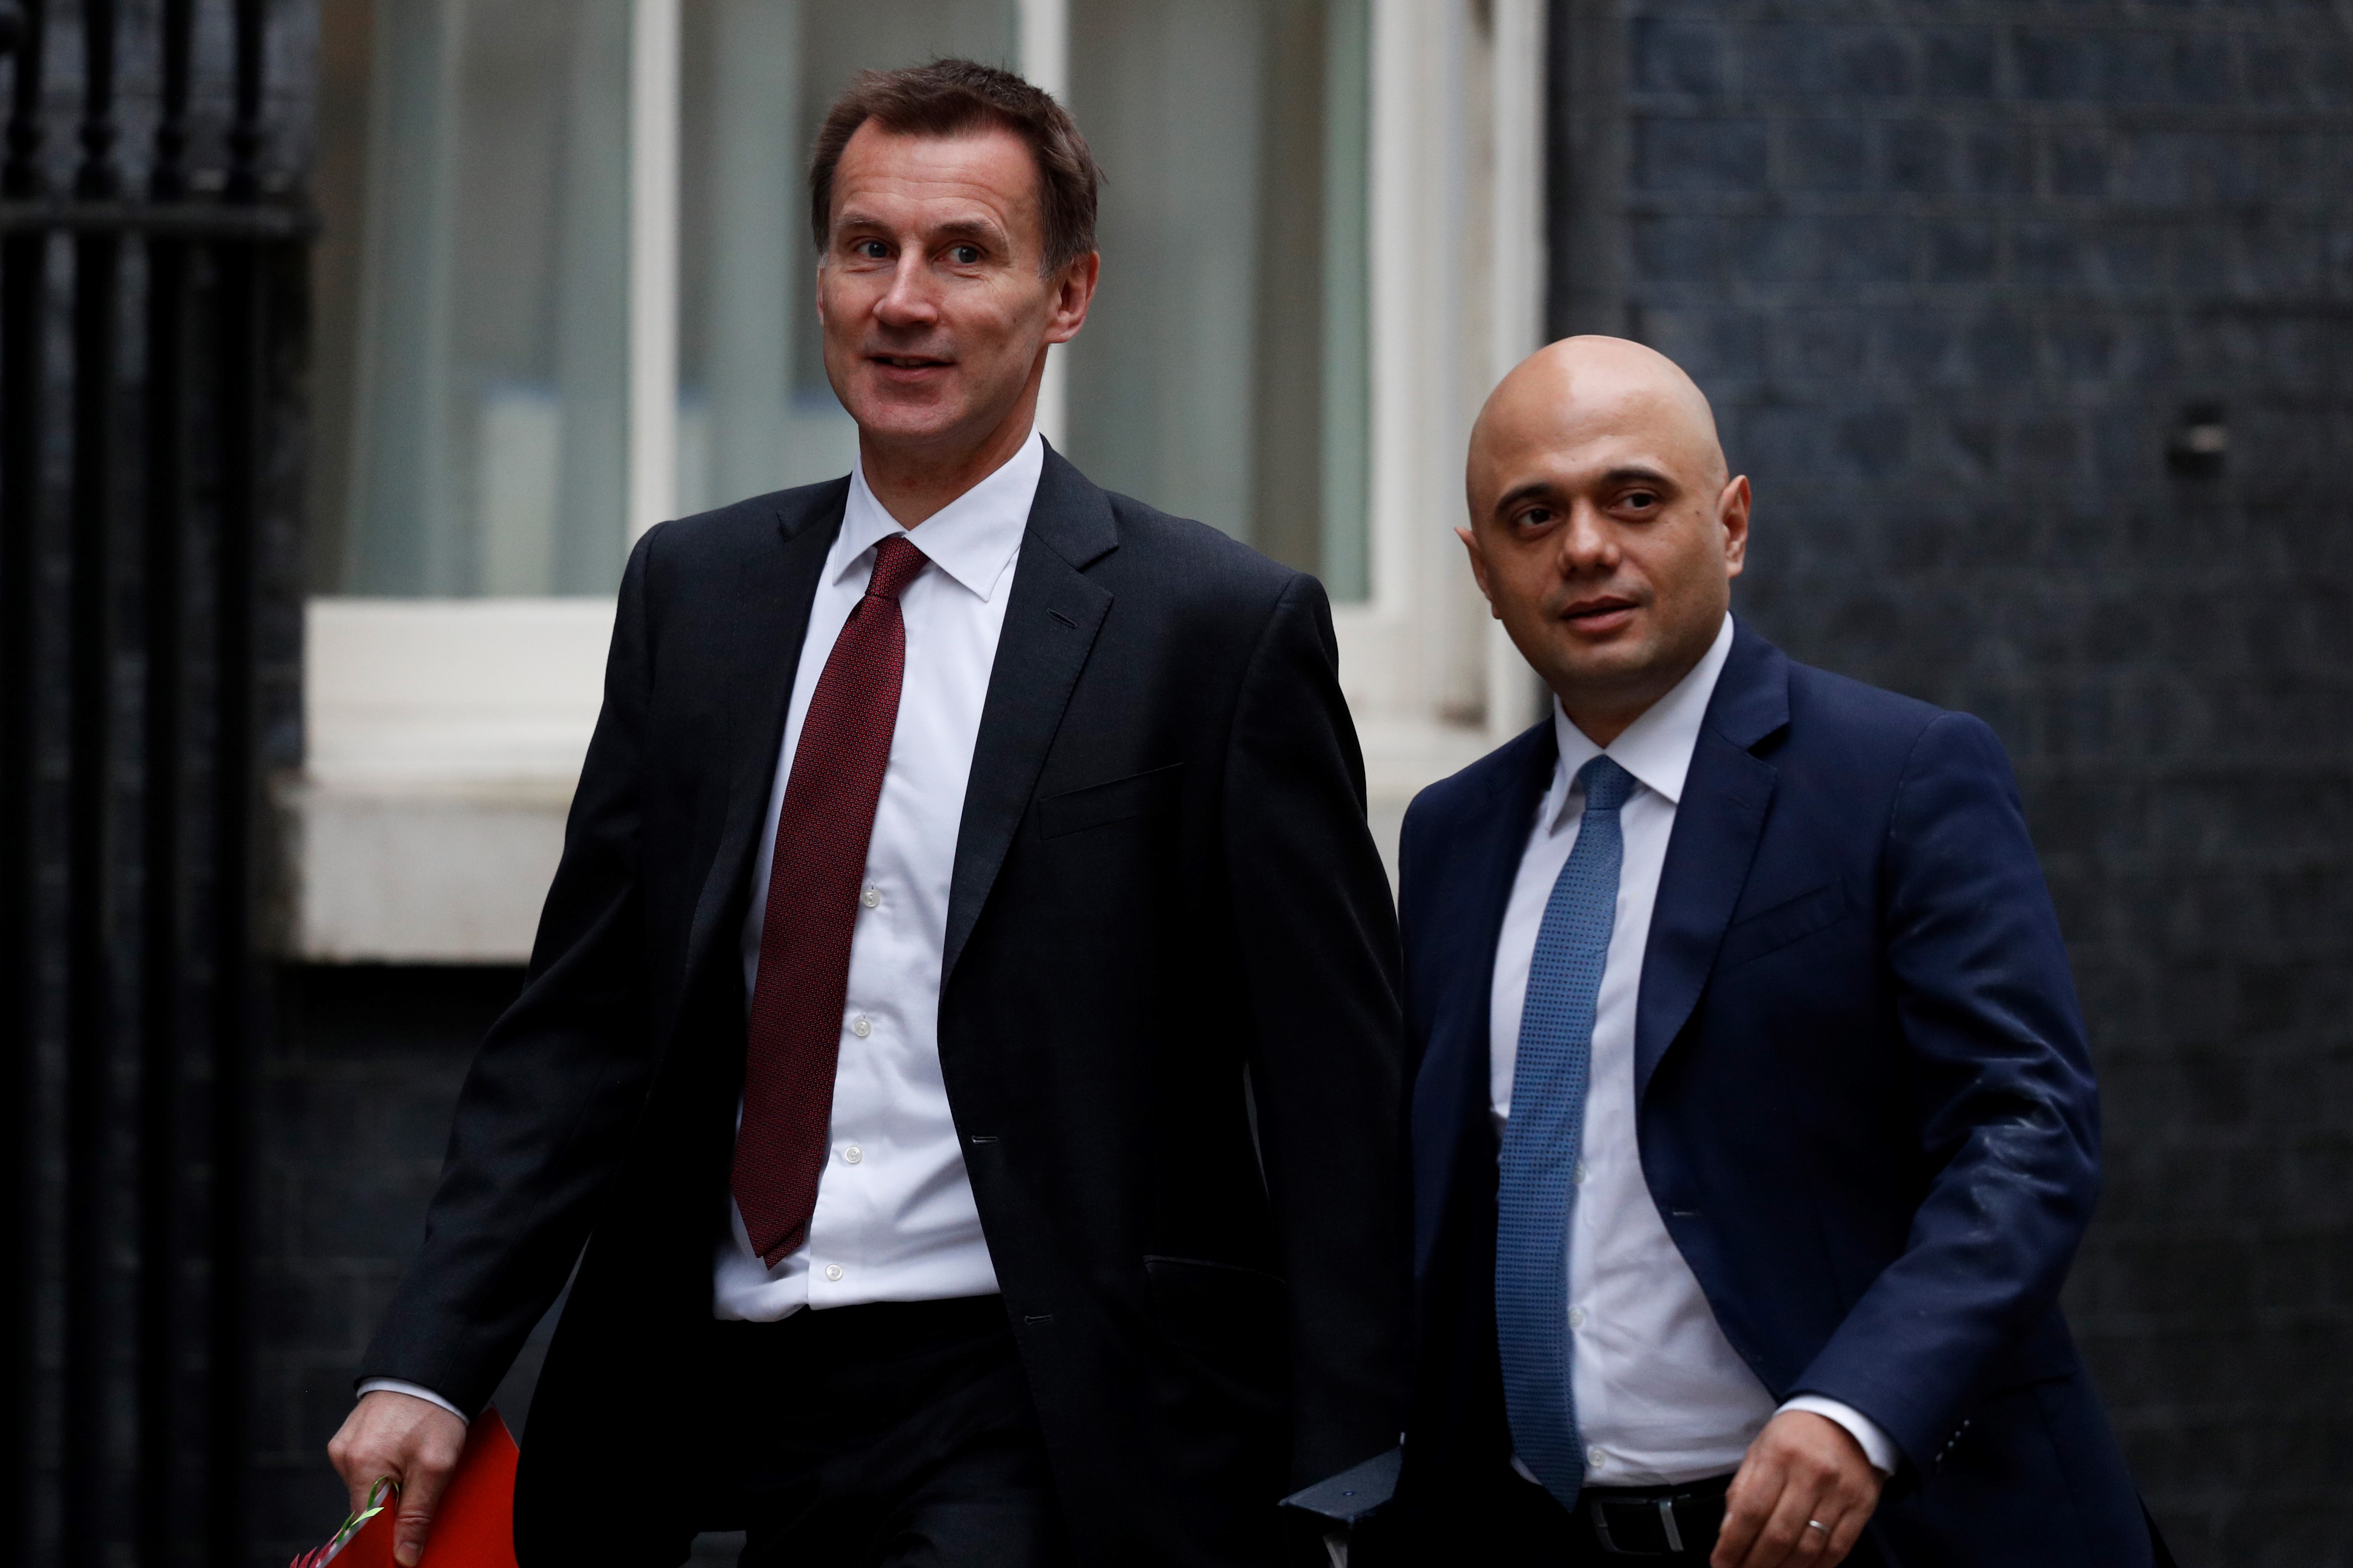 Britain's Foreign Secretary Jeremy Hunt (L) and Britain's Home Secretary Sajid Javid arrive for the weekly cabinet meeting at 10 Downing street in London on 15 January, 2019 (AFP)